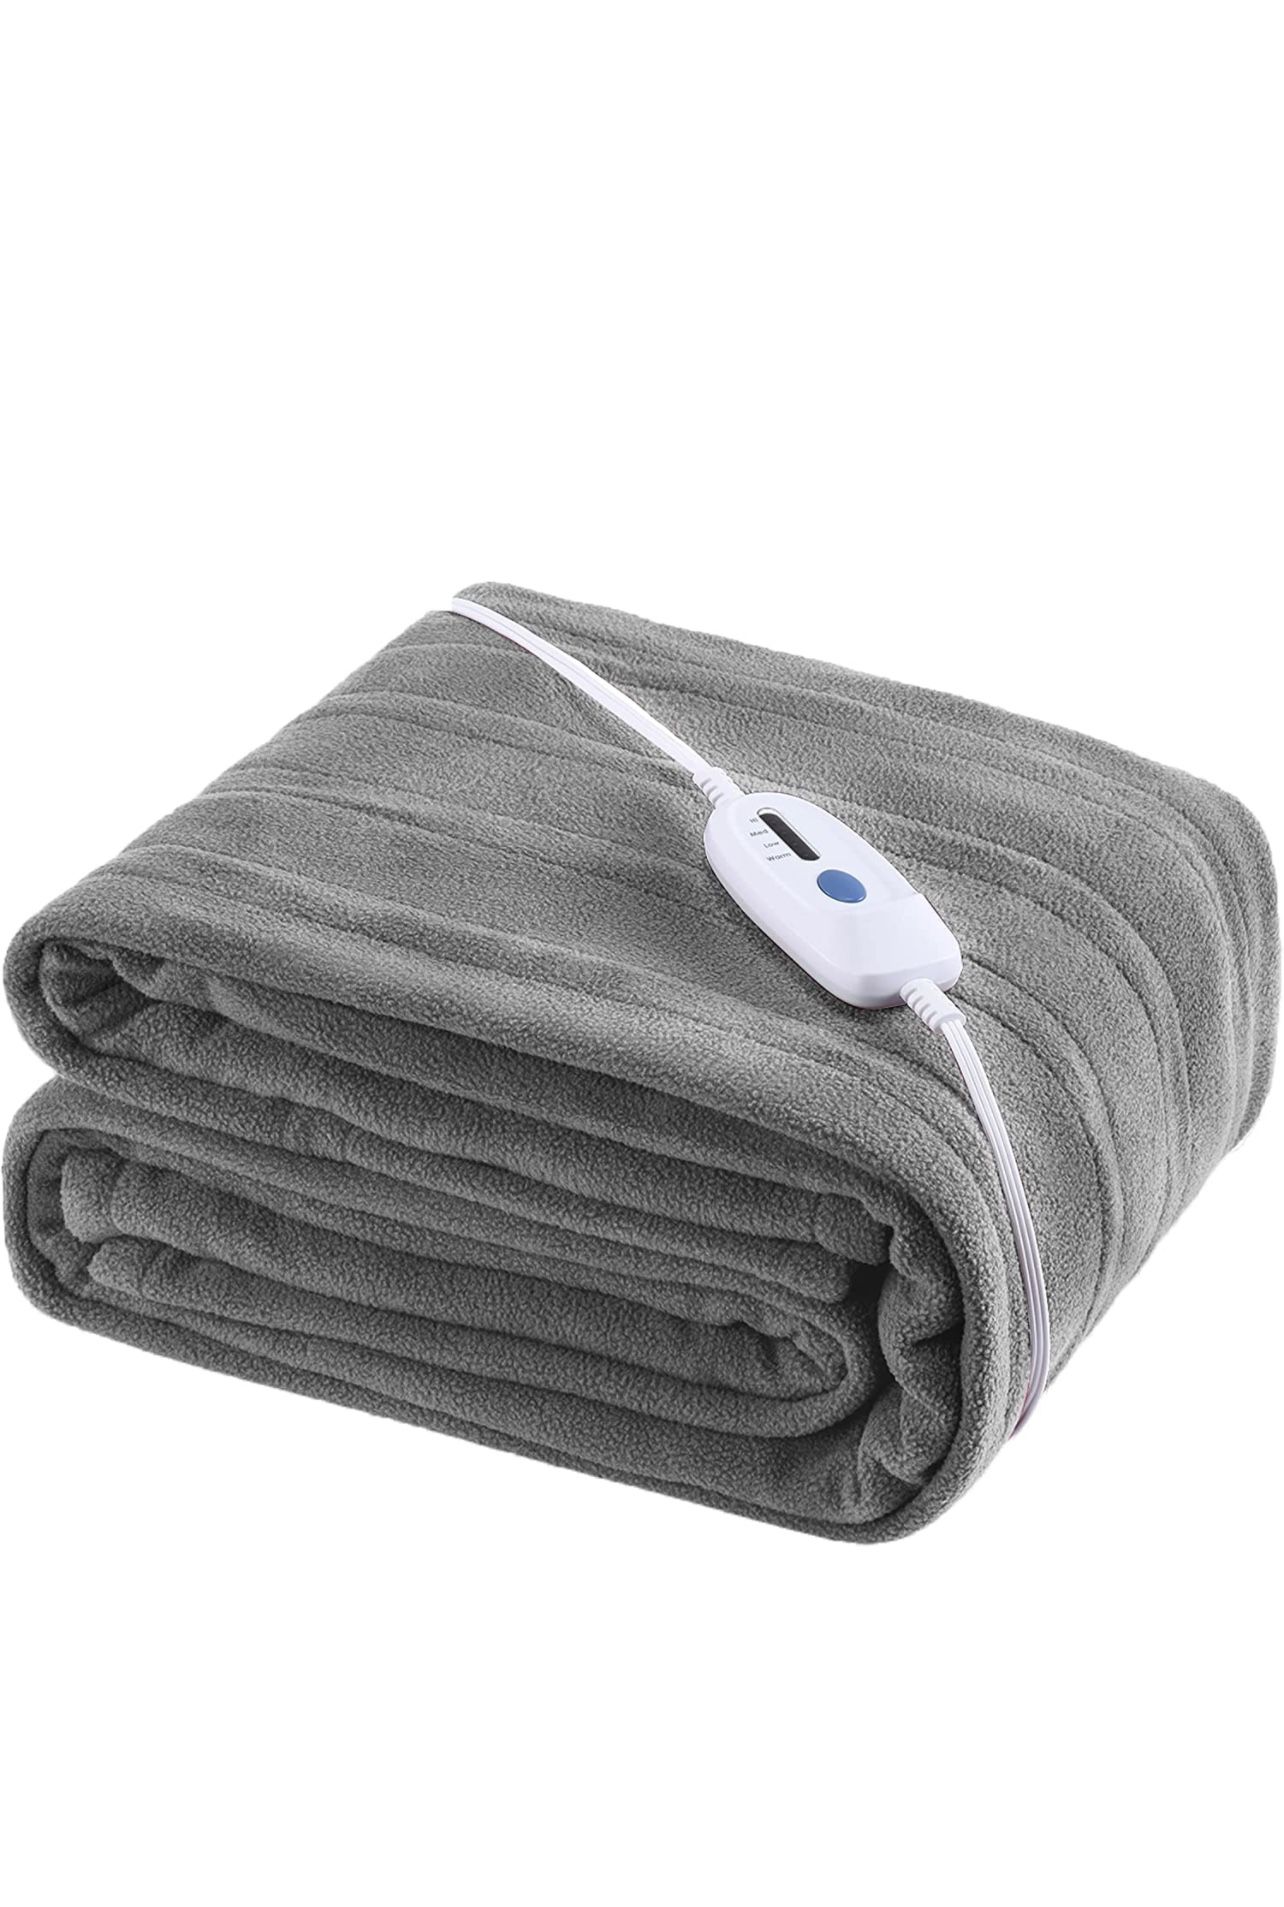 Electric Heated Blanket Twin Size 62"x84" Home Bedding Use Controller with 4 Heating Levels and  9 Hours Auto Shut Off Soft Fleece Machine Washable -G